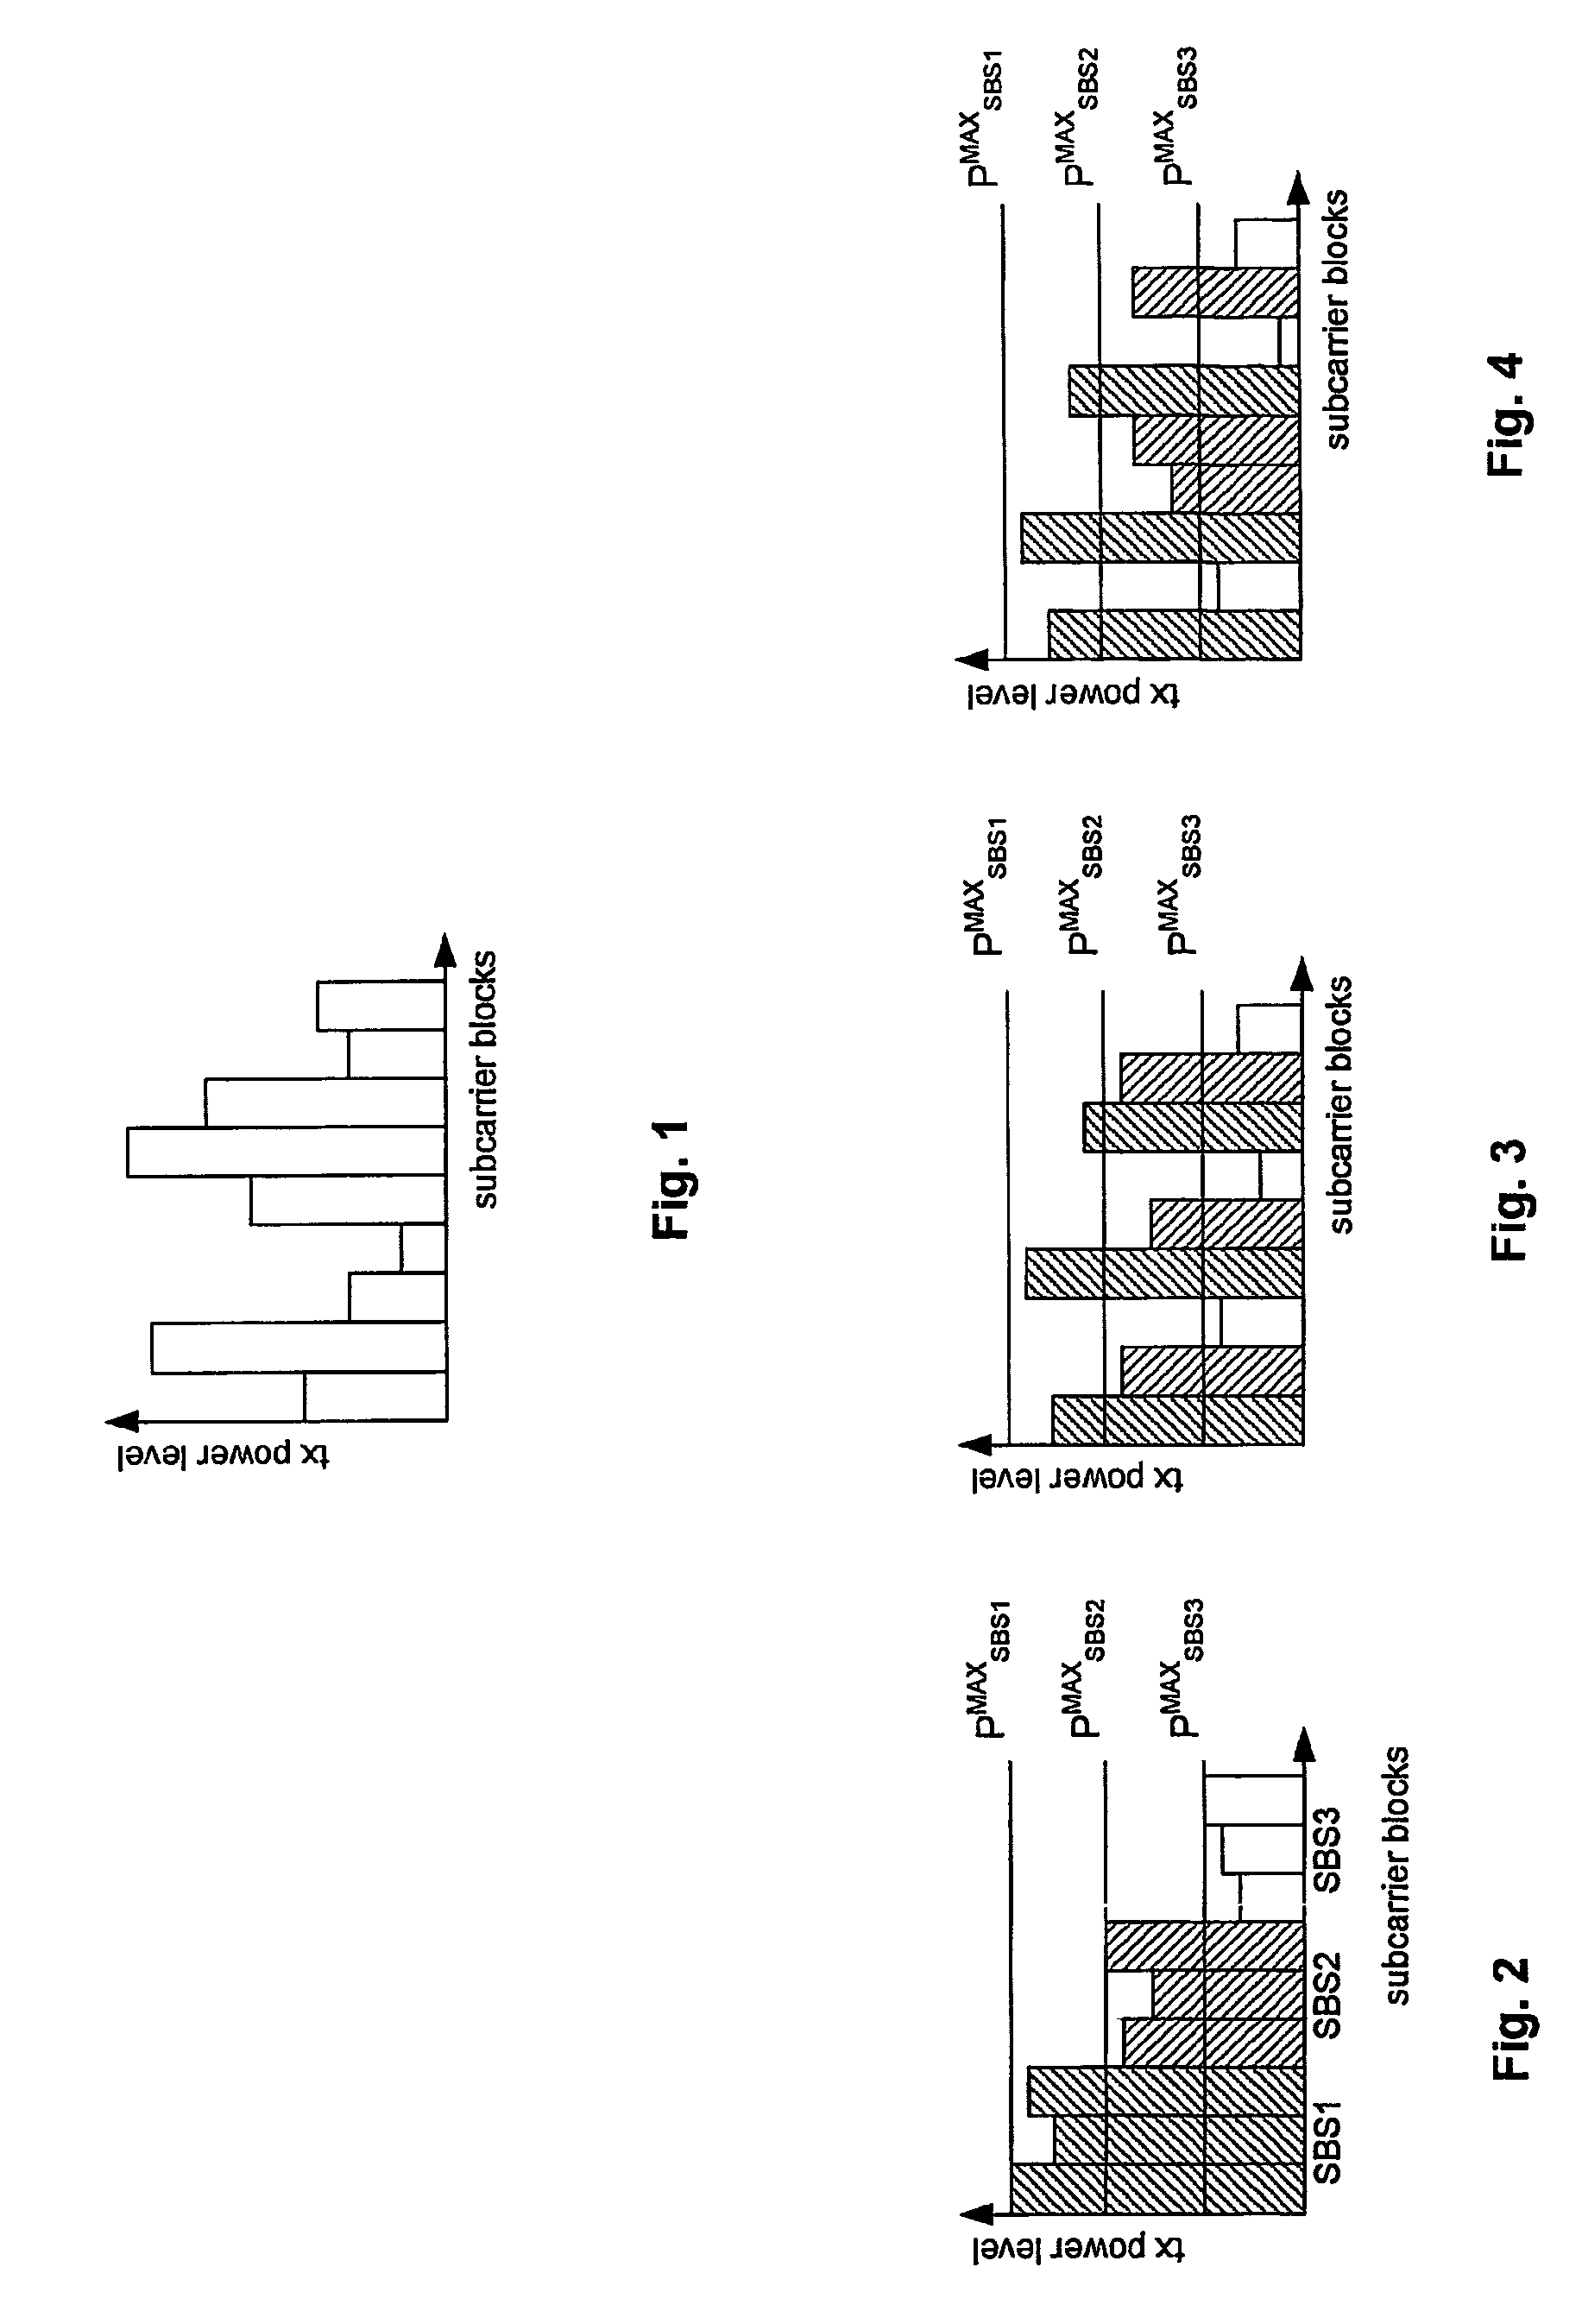 Transmission power range setting during channel assignment for interference balancing in a cellular wireless communication system